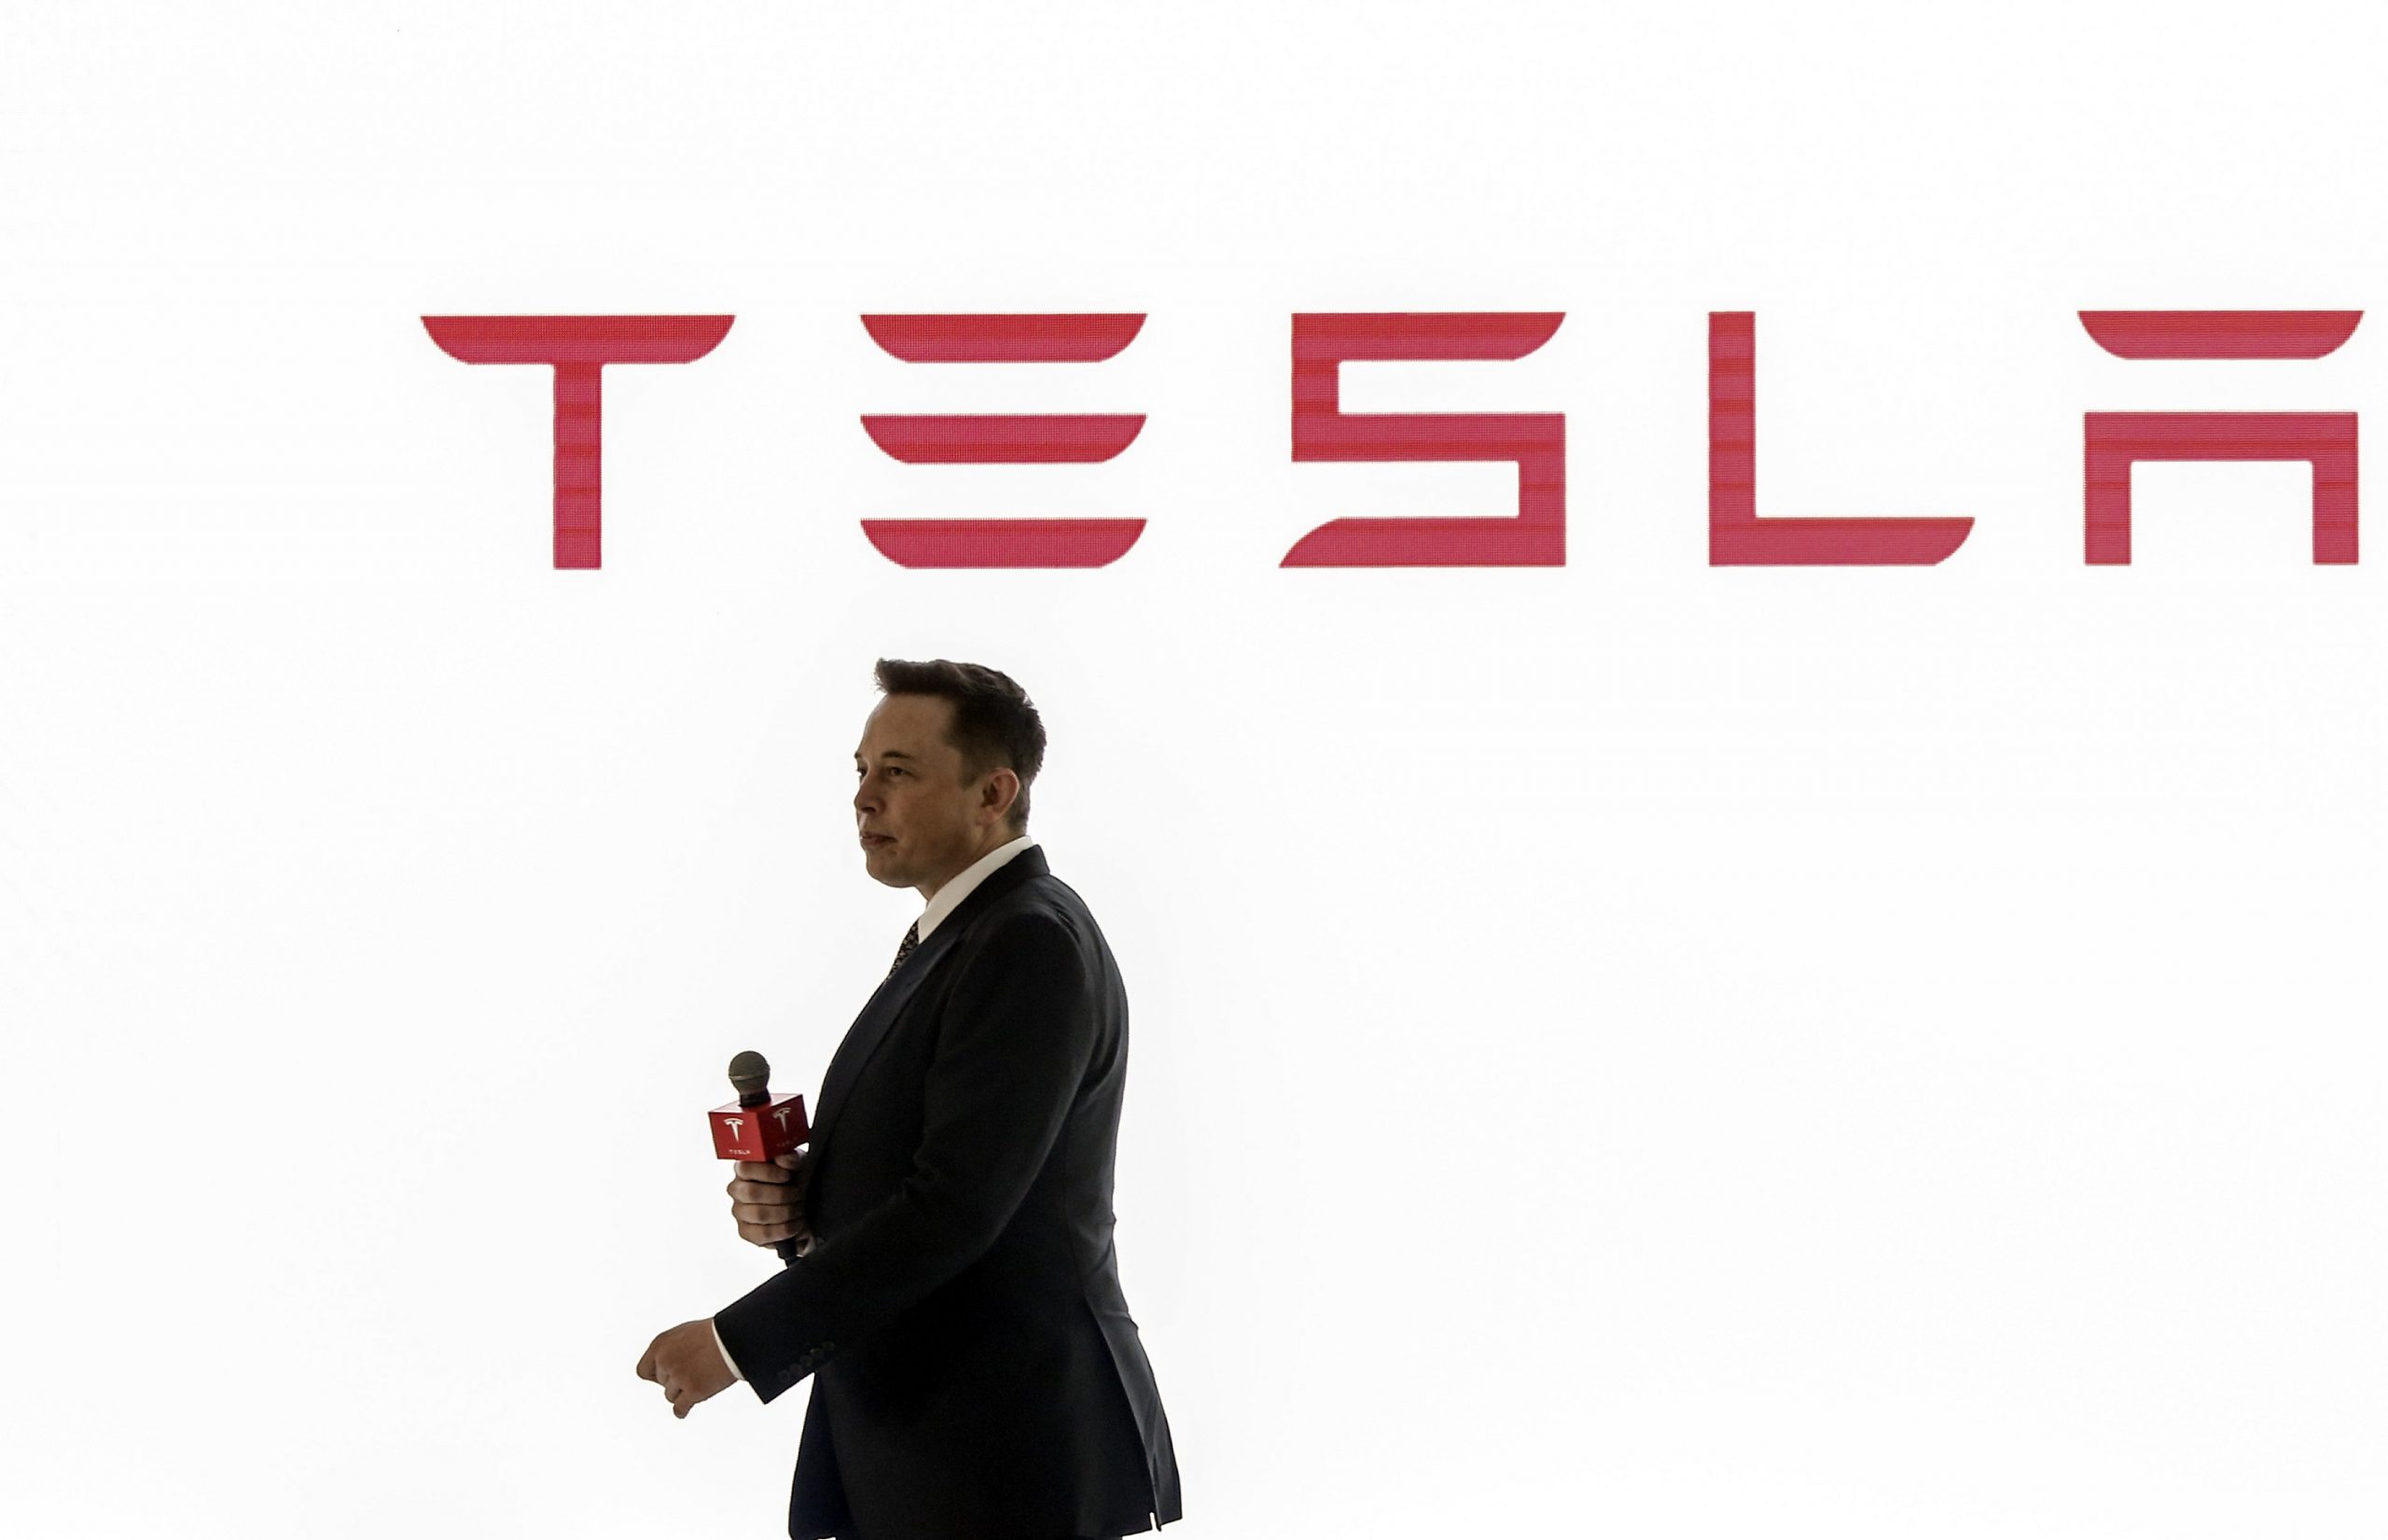 Tesla CEO Elon Musk presents at a conference with the brand's logo seen in red on a white background behind him